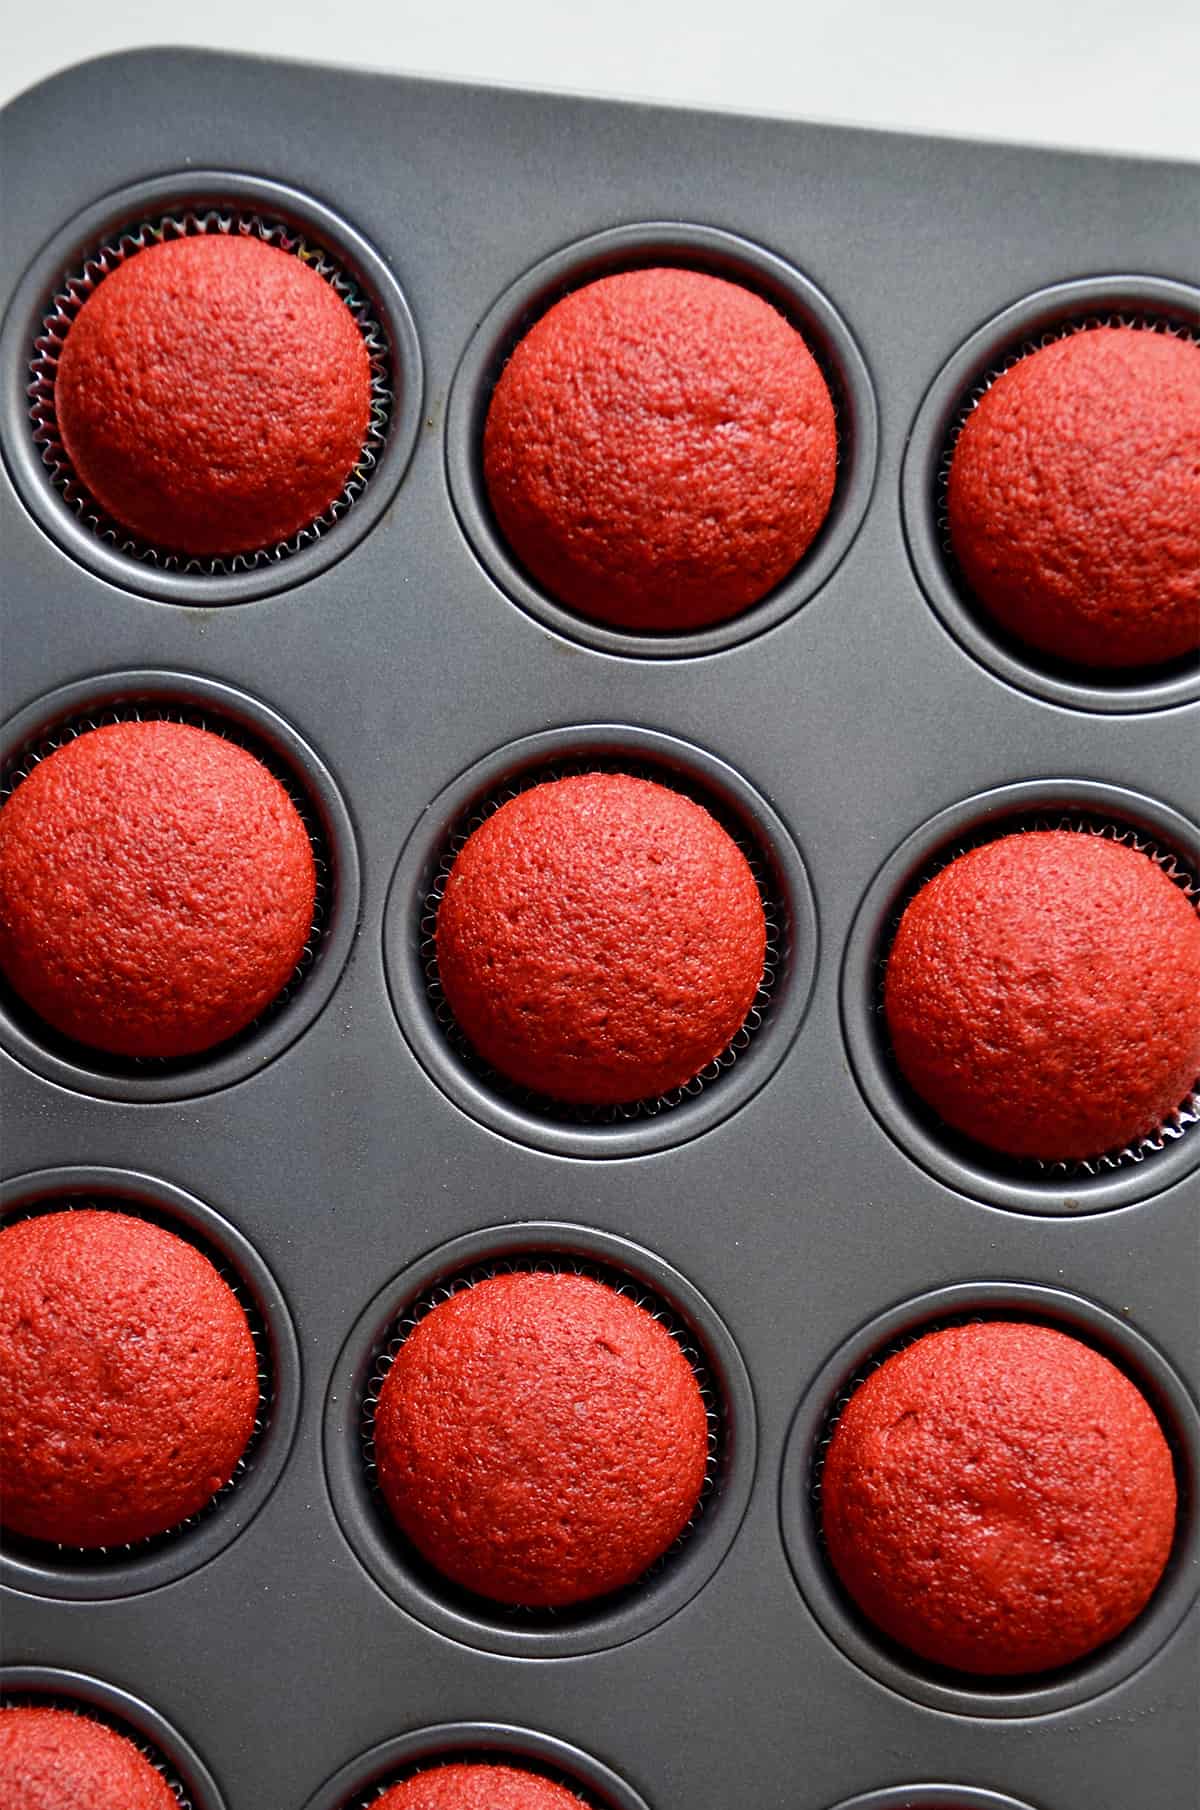 Baked red velvet cupcakes are in a cupcake pan.